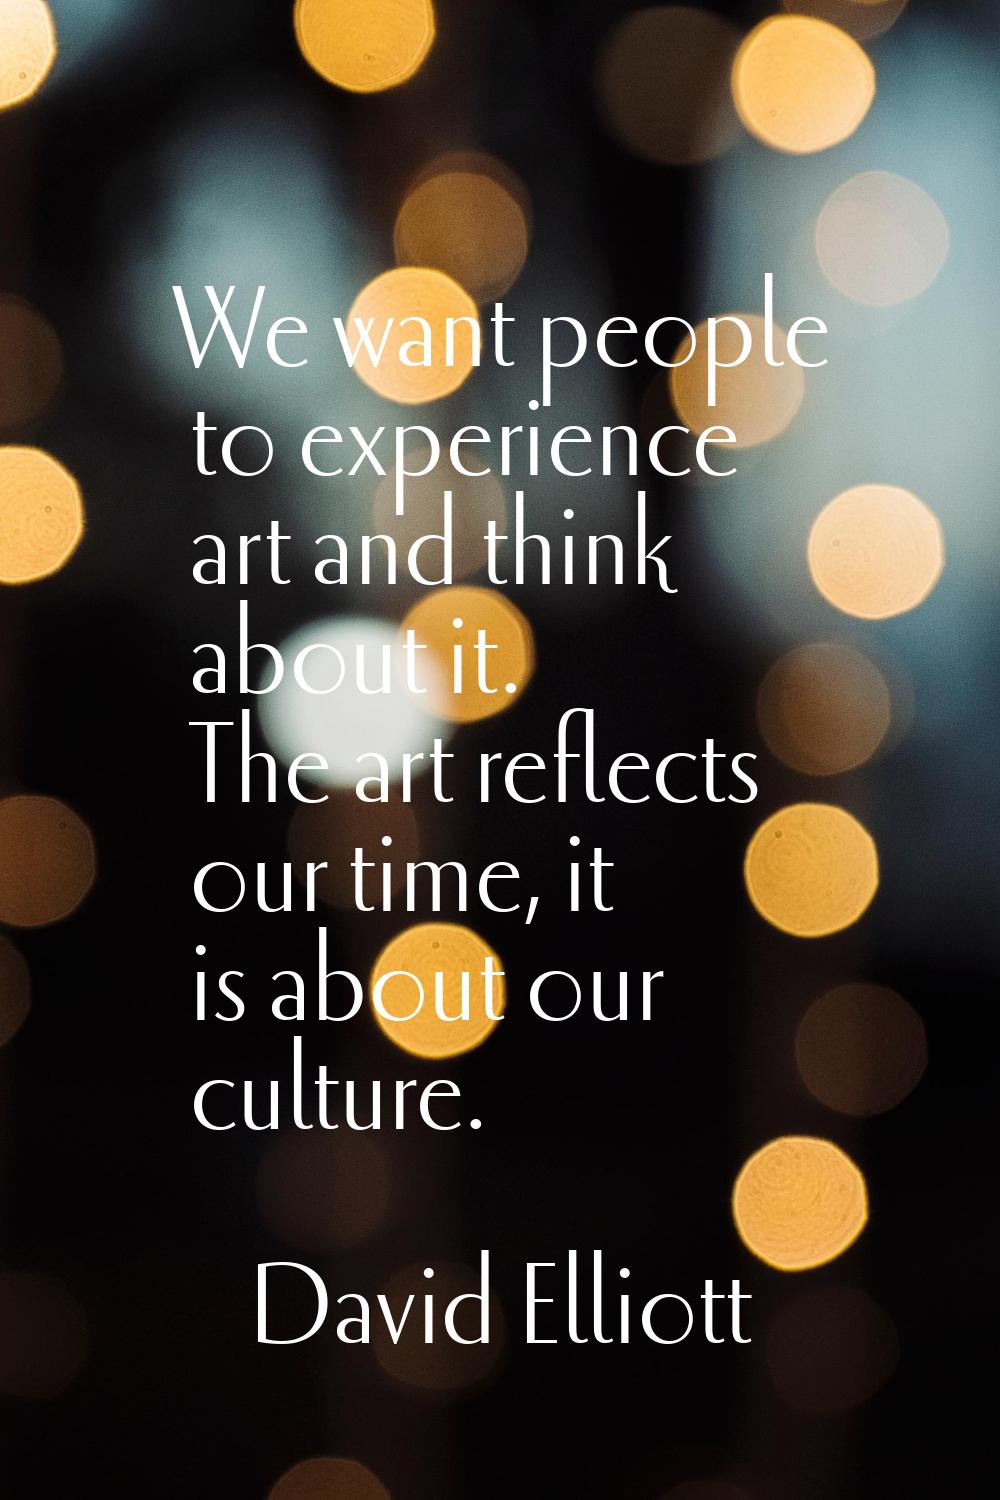 We want people to experience art and think about it. The art reflects our time, it is about our cul